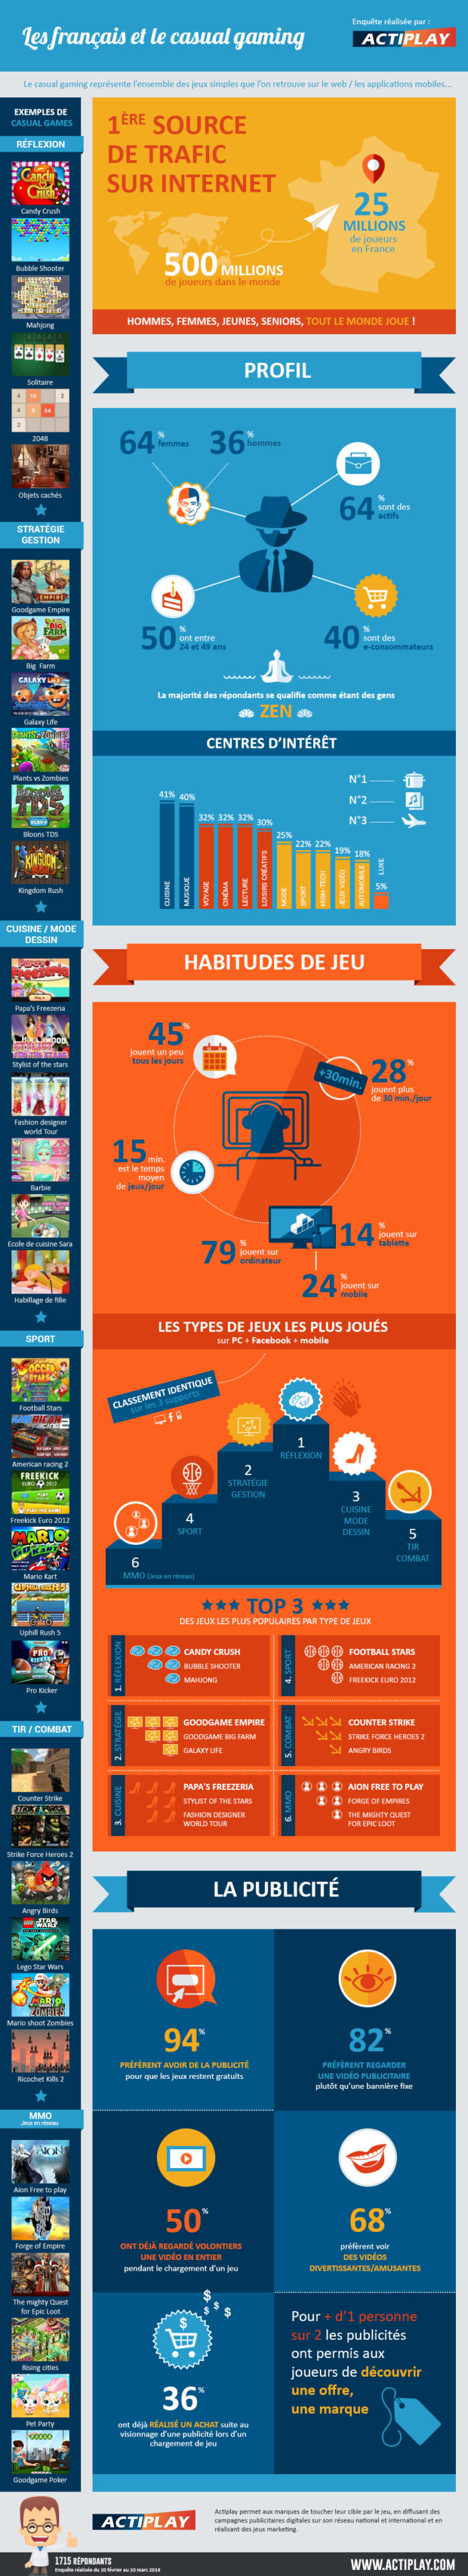 infographie_actiplay_les_francais_et_le_casual_gaming